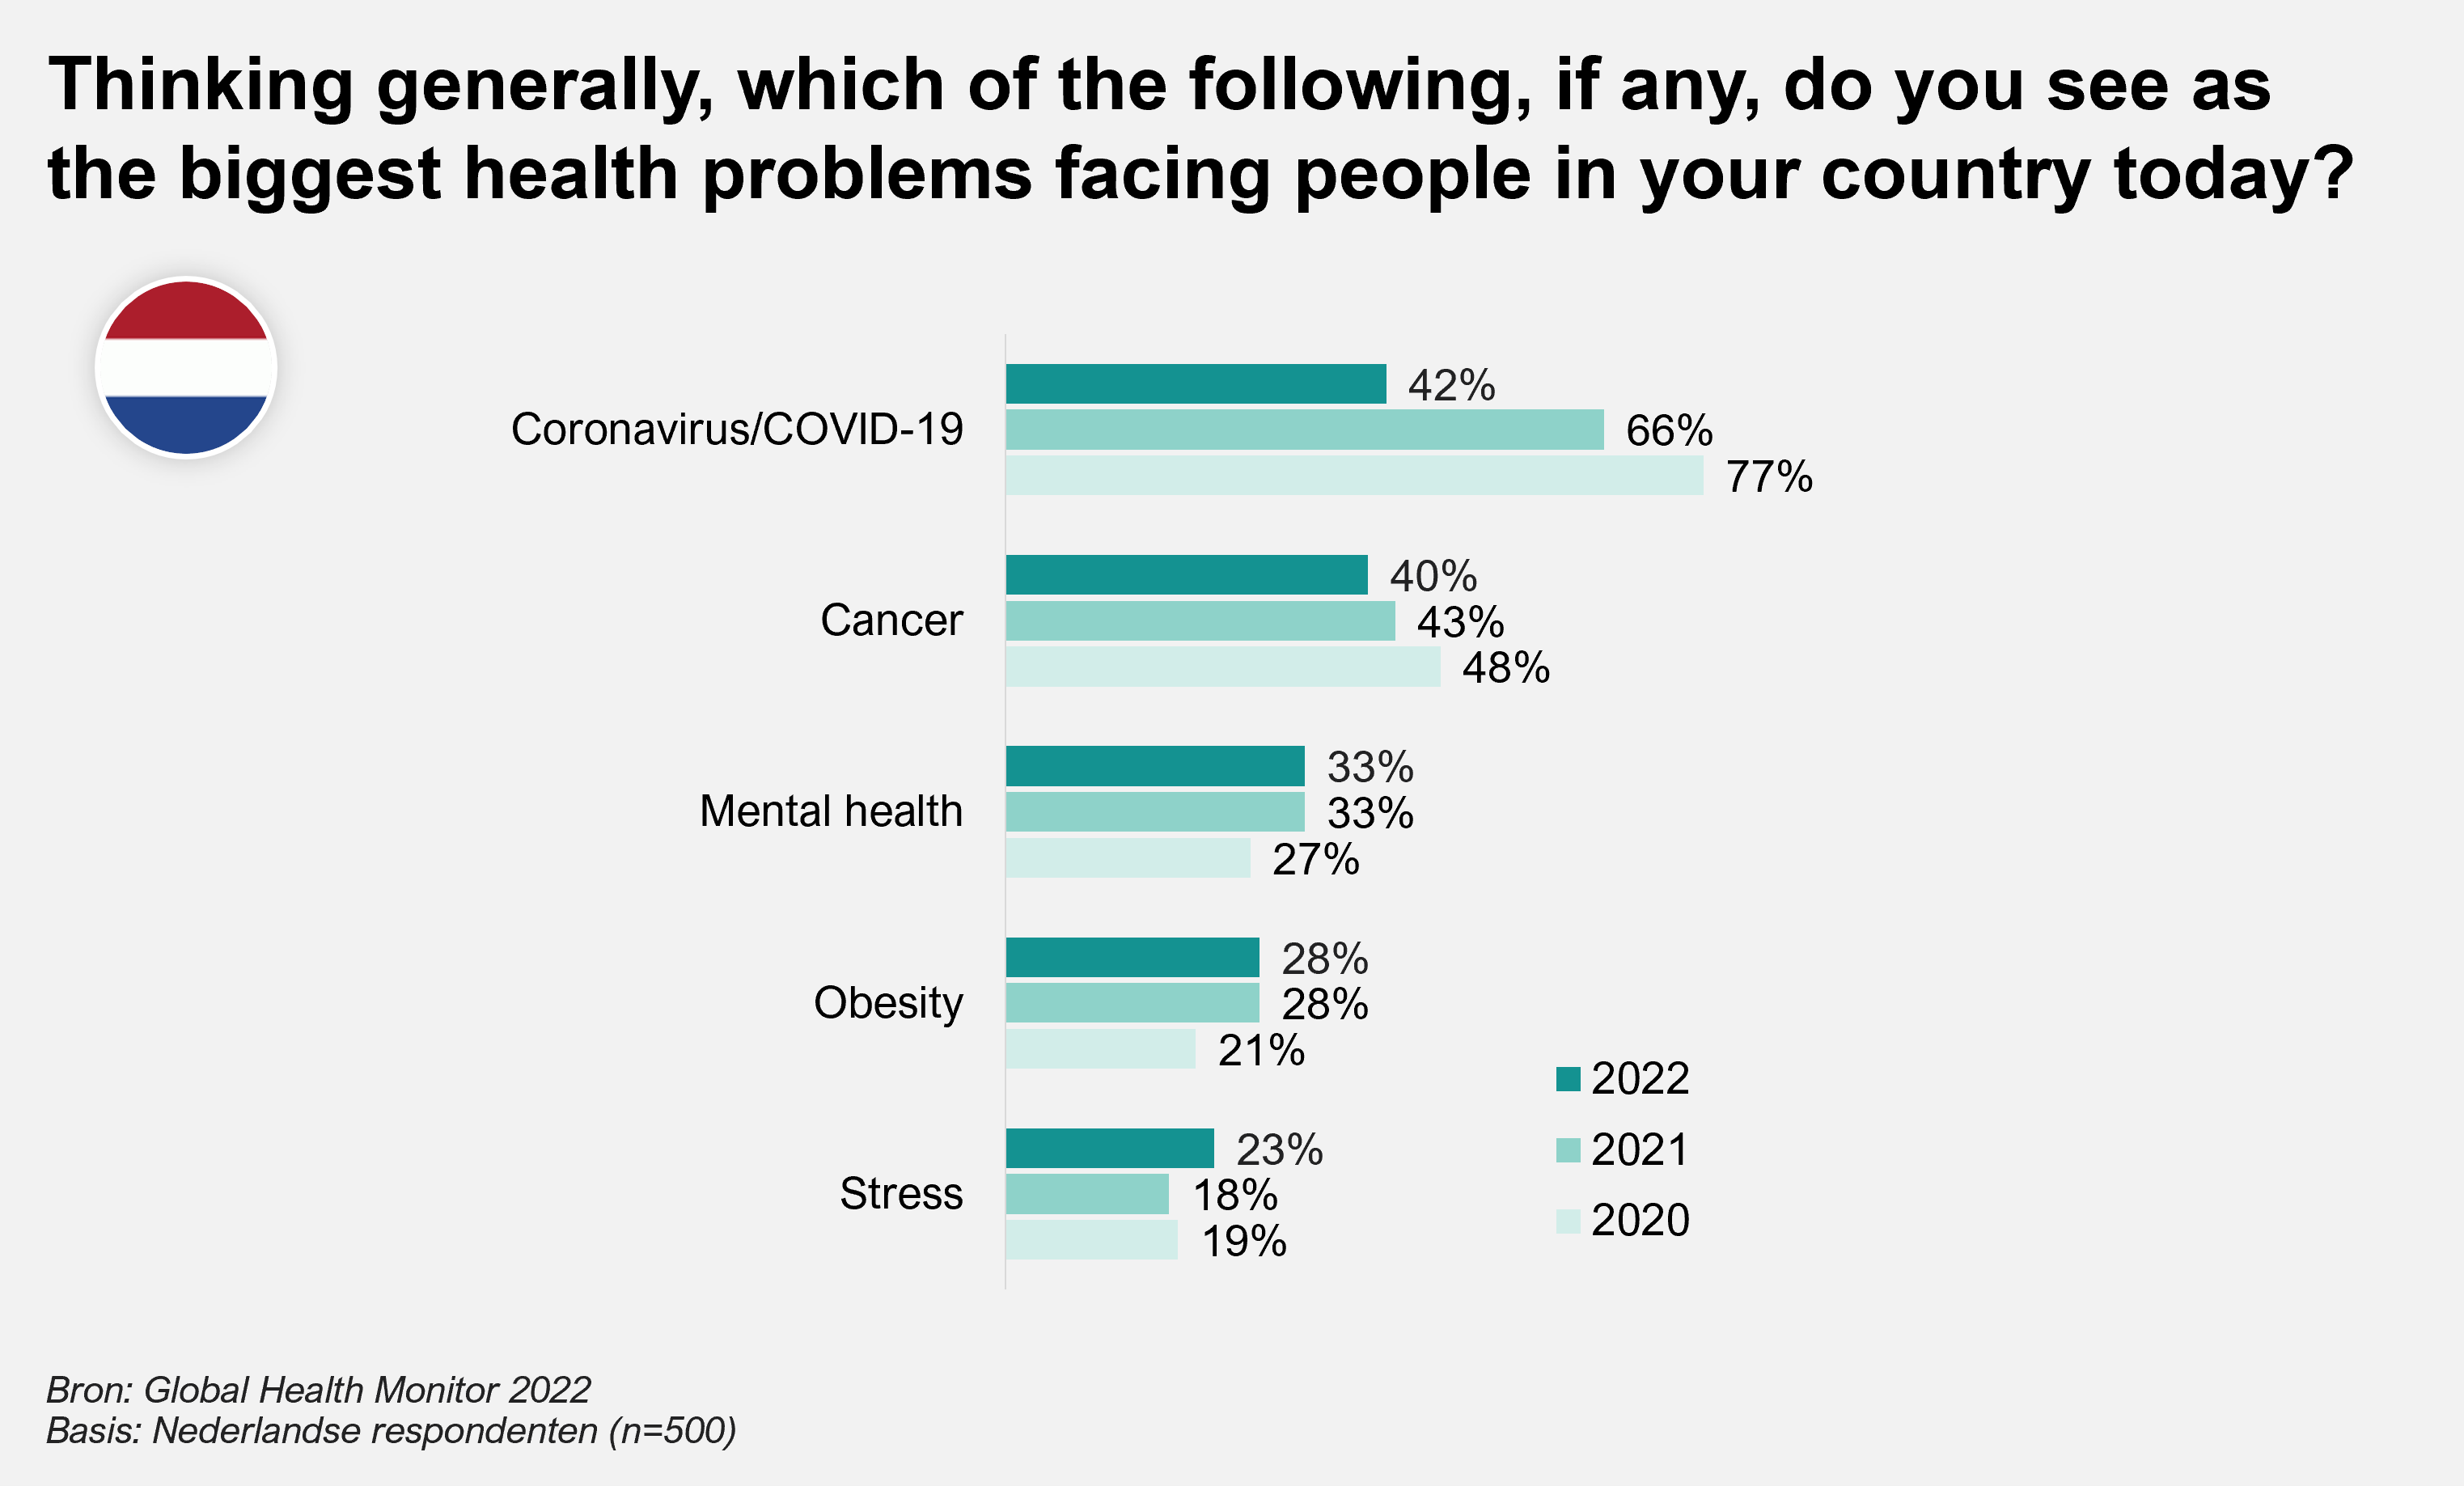 Thinking generally, which of the following, if any, do you see as the biggest health problems facing people in your country today?